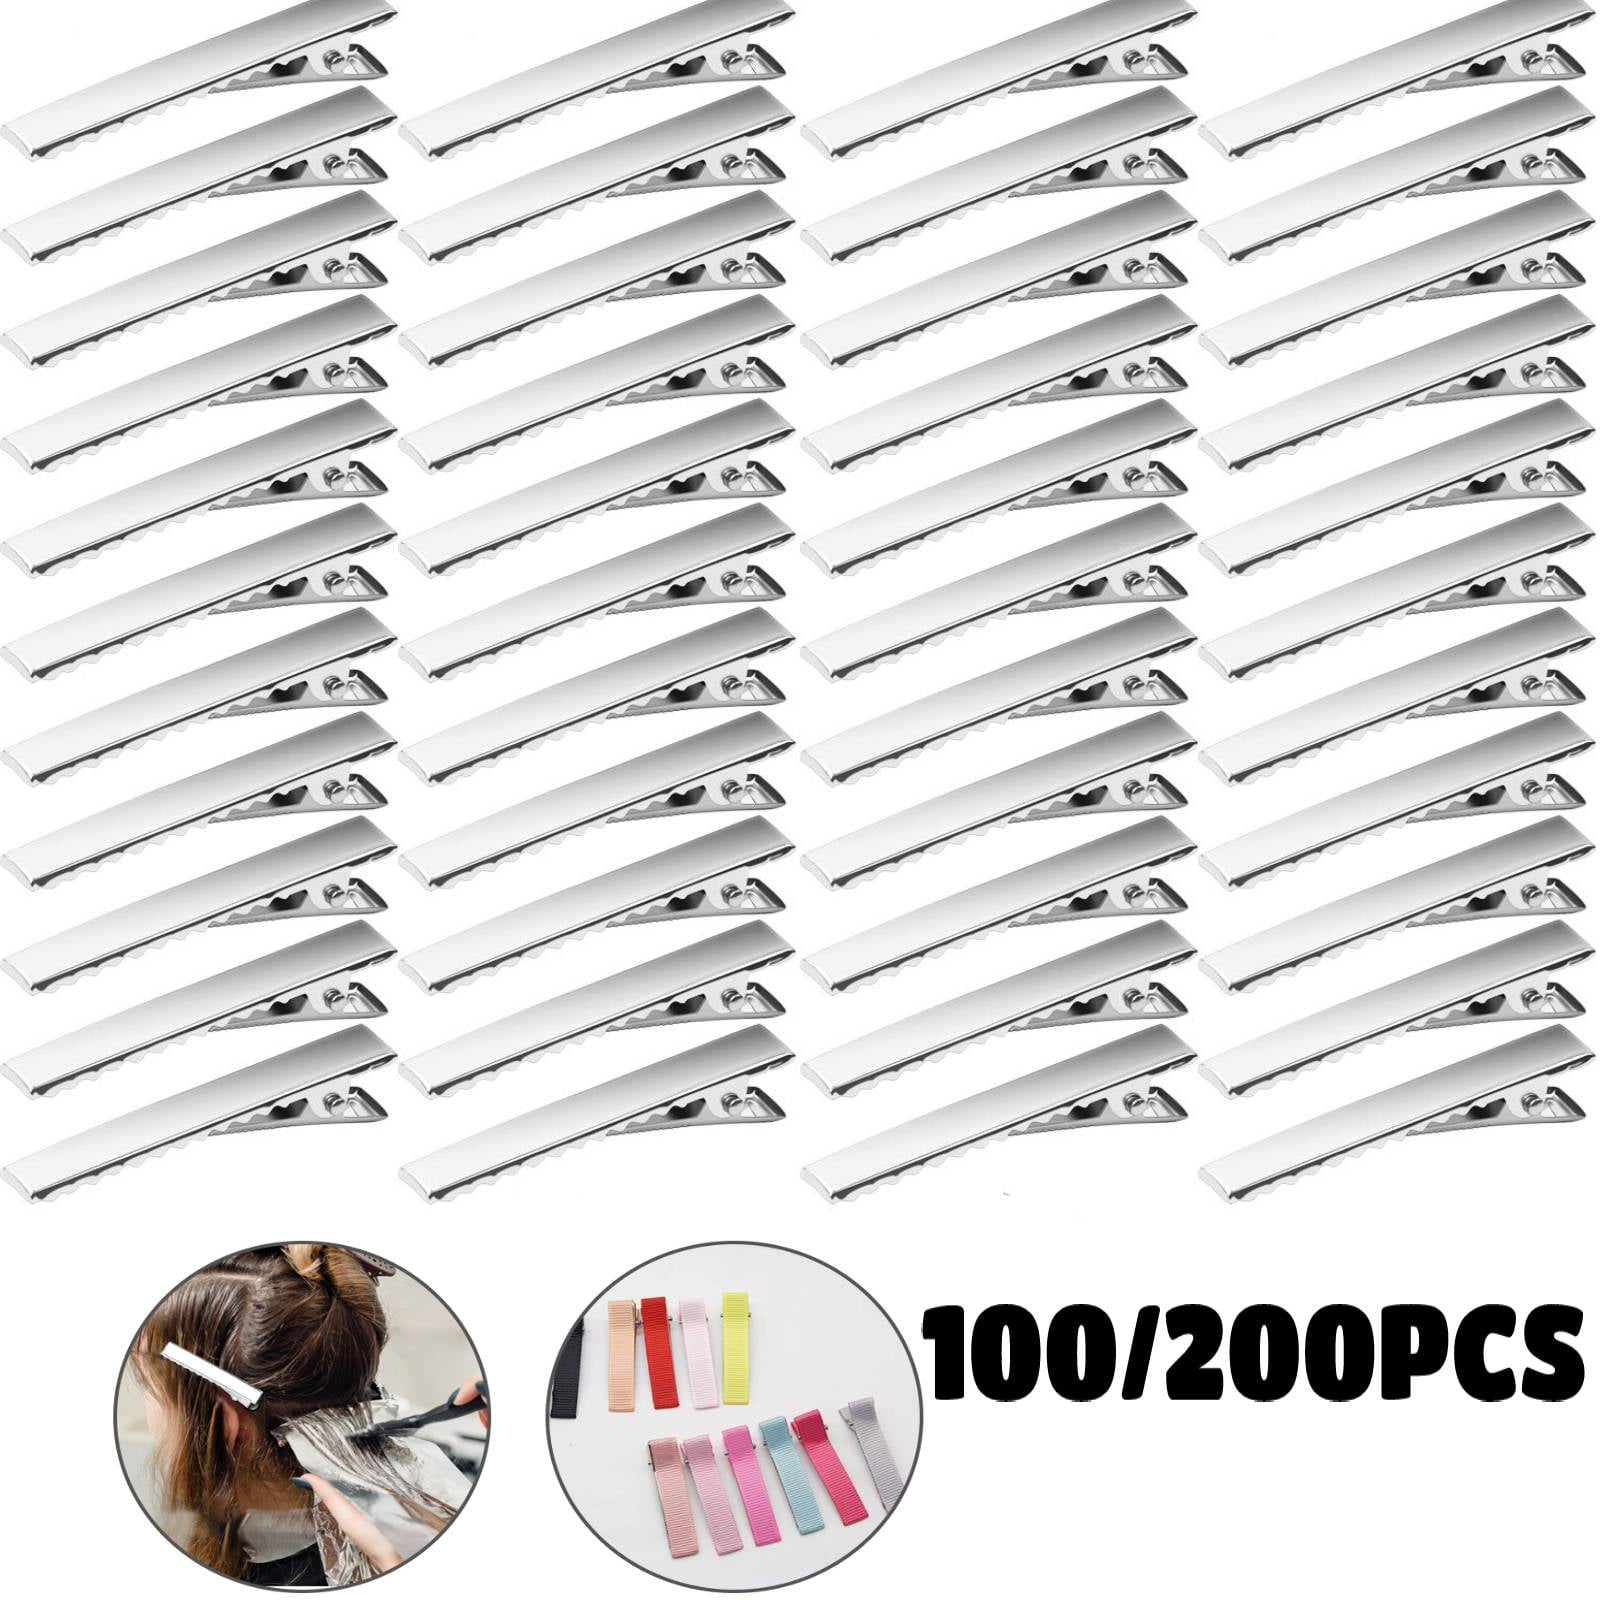 10pcs Single Prong Alligator Clips With Teeth Aligator Stainless Steel Clip Test 